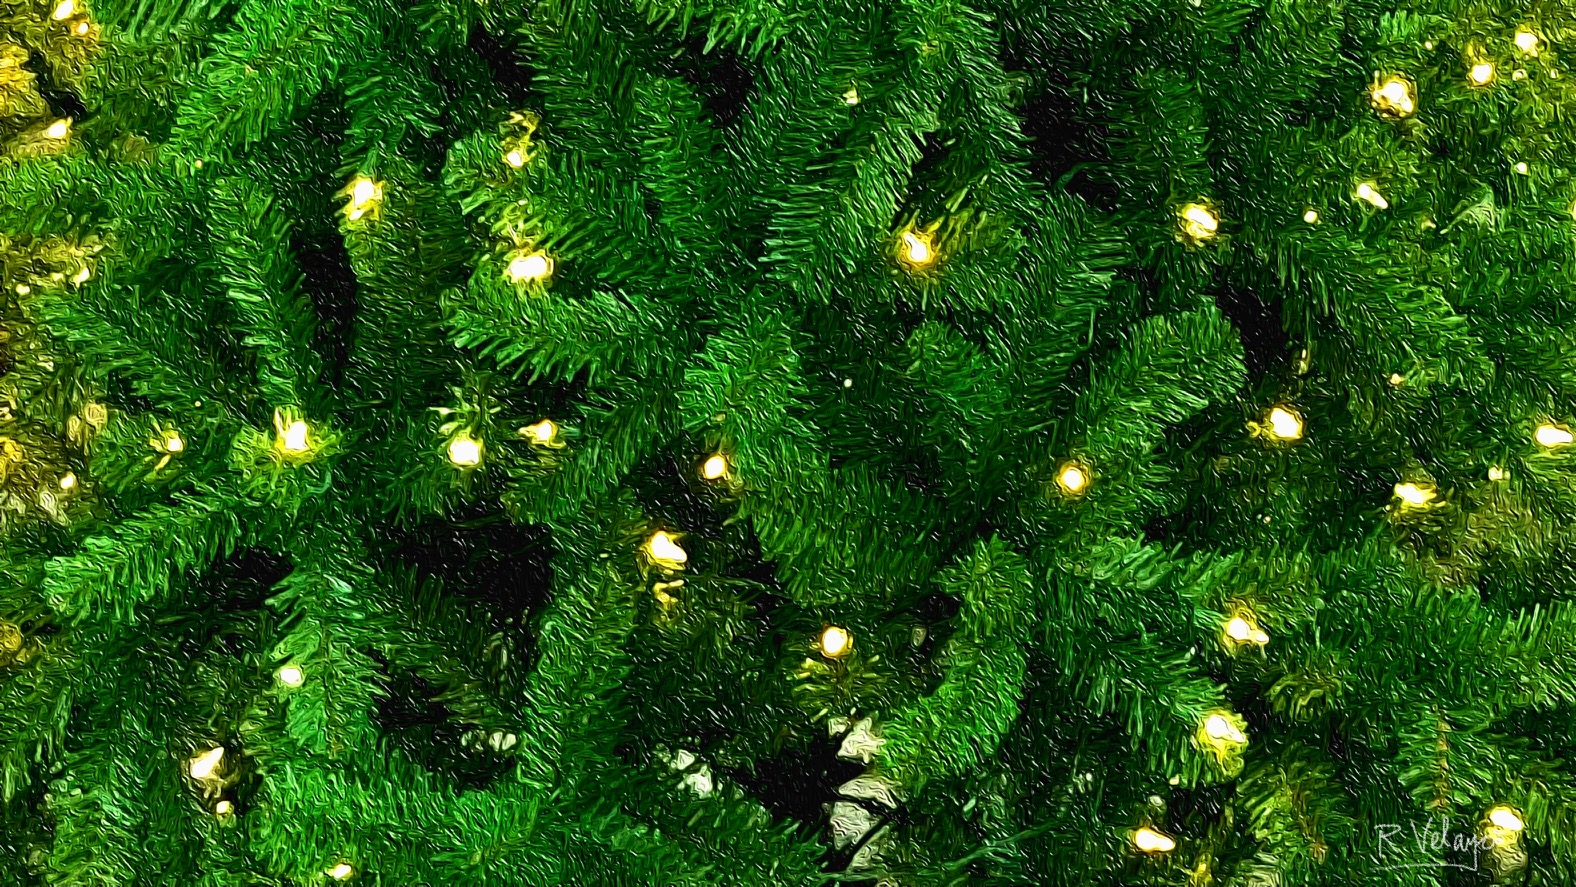 "PINE TREE WITH WHITE CHRISTMAS LIGHTS" [Created: 10/14/2021]